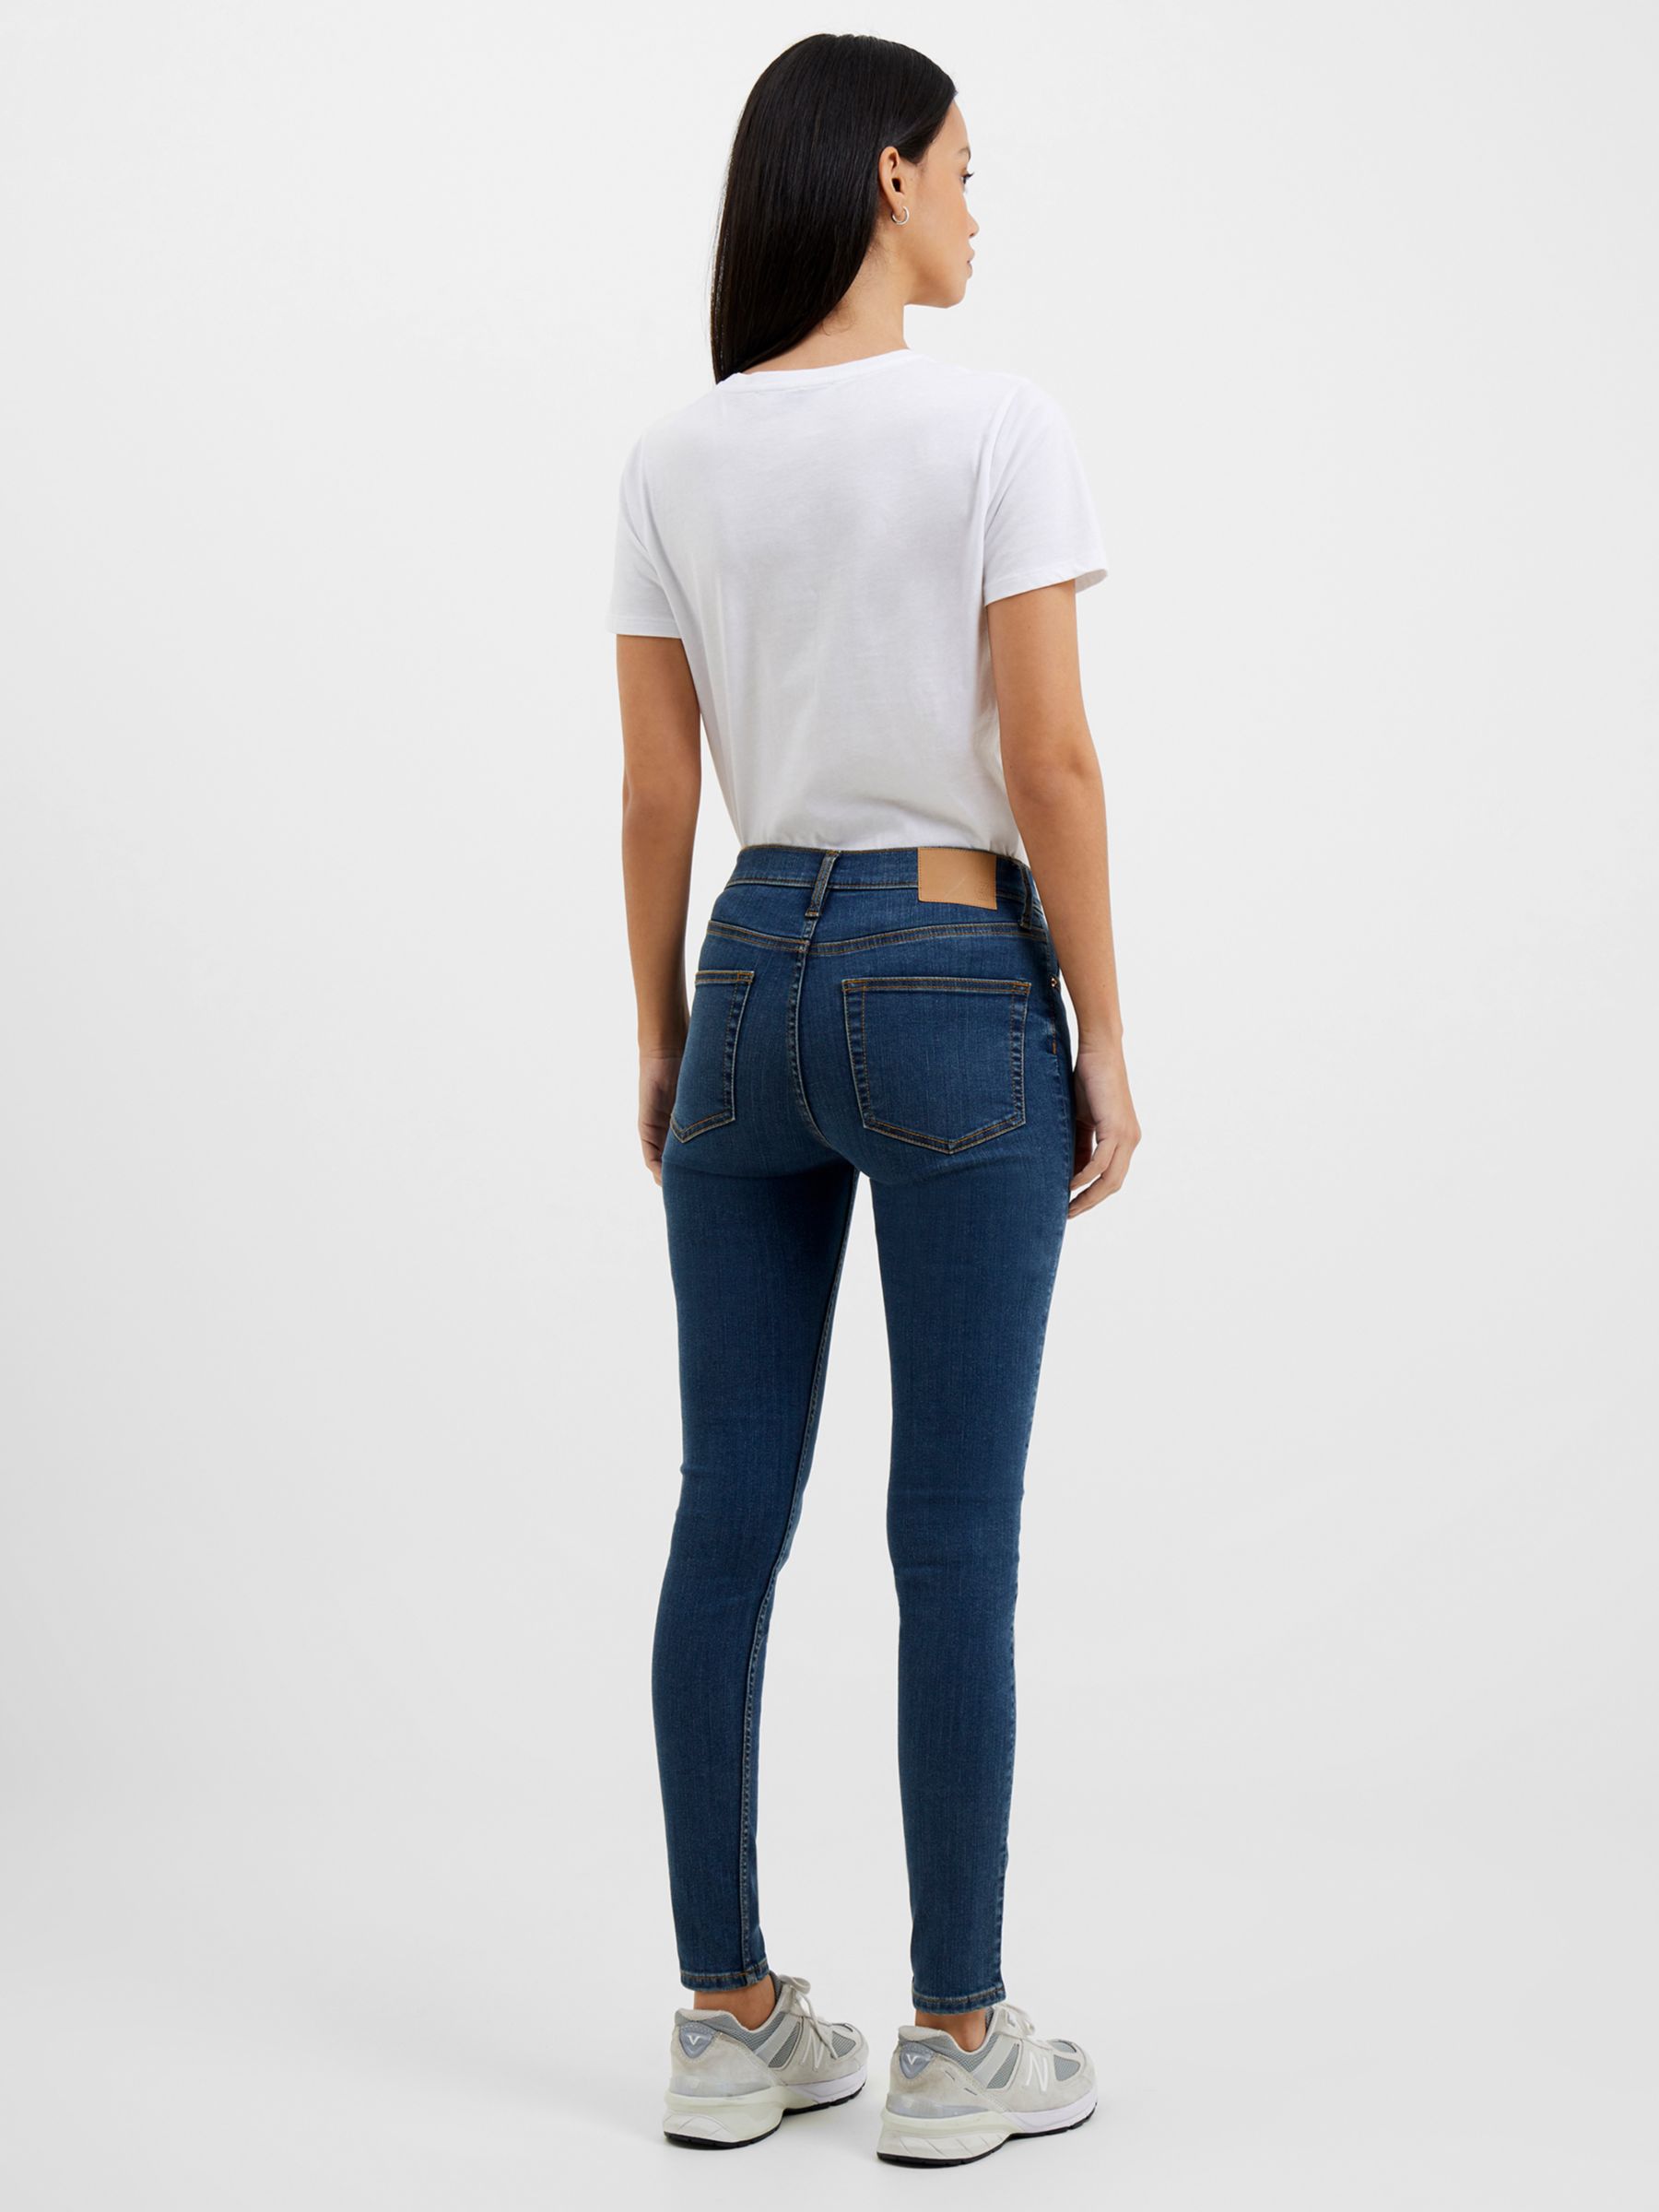 Buy French Connection Rebound Response Skinny Jeans, Vintage Online at johnlewis.com